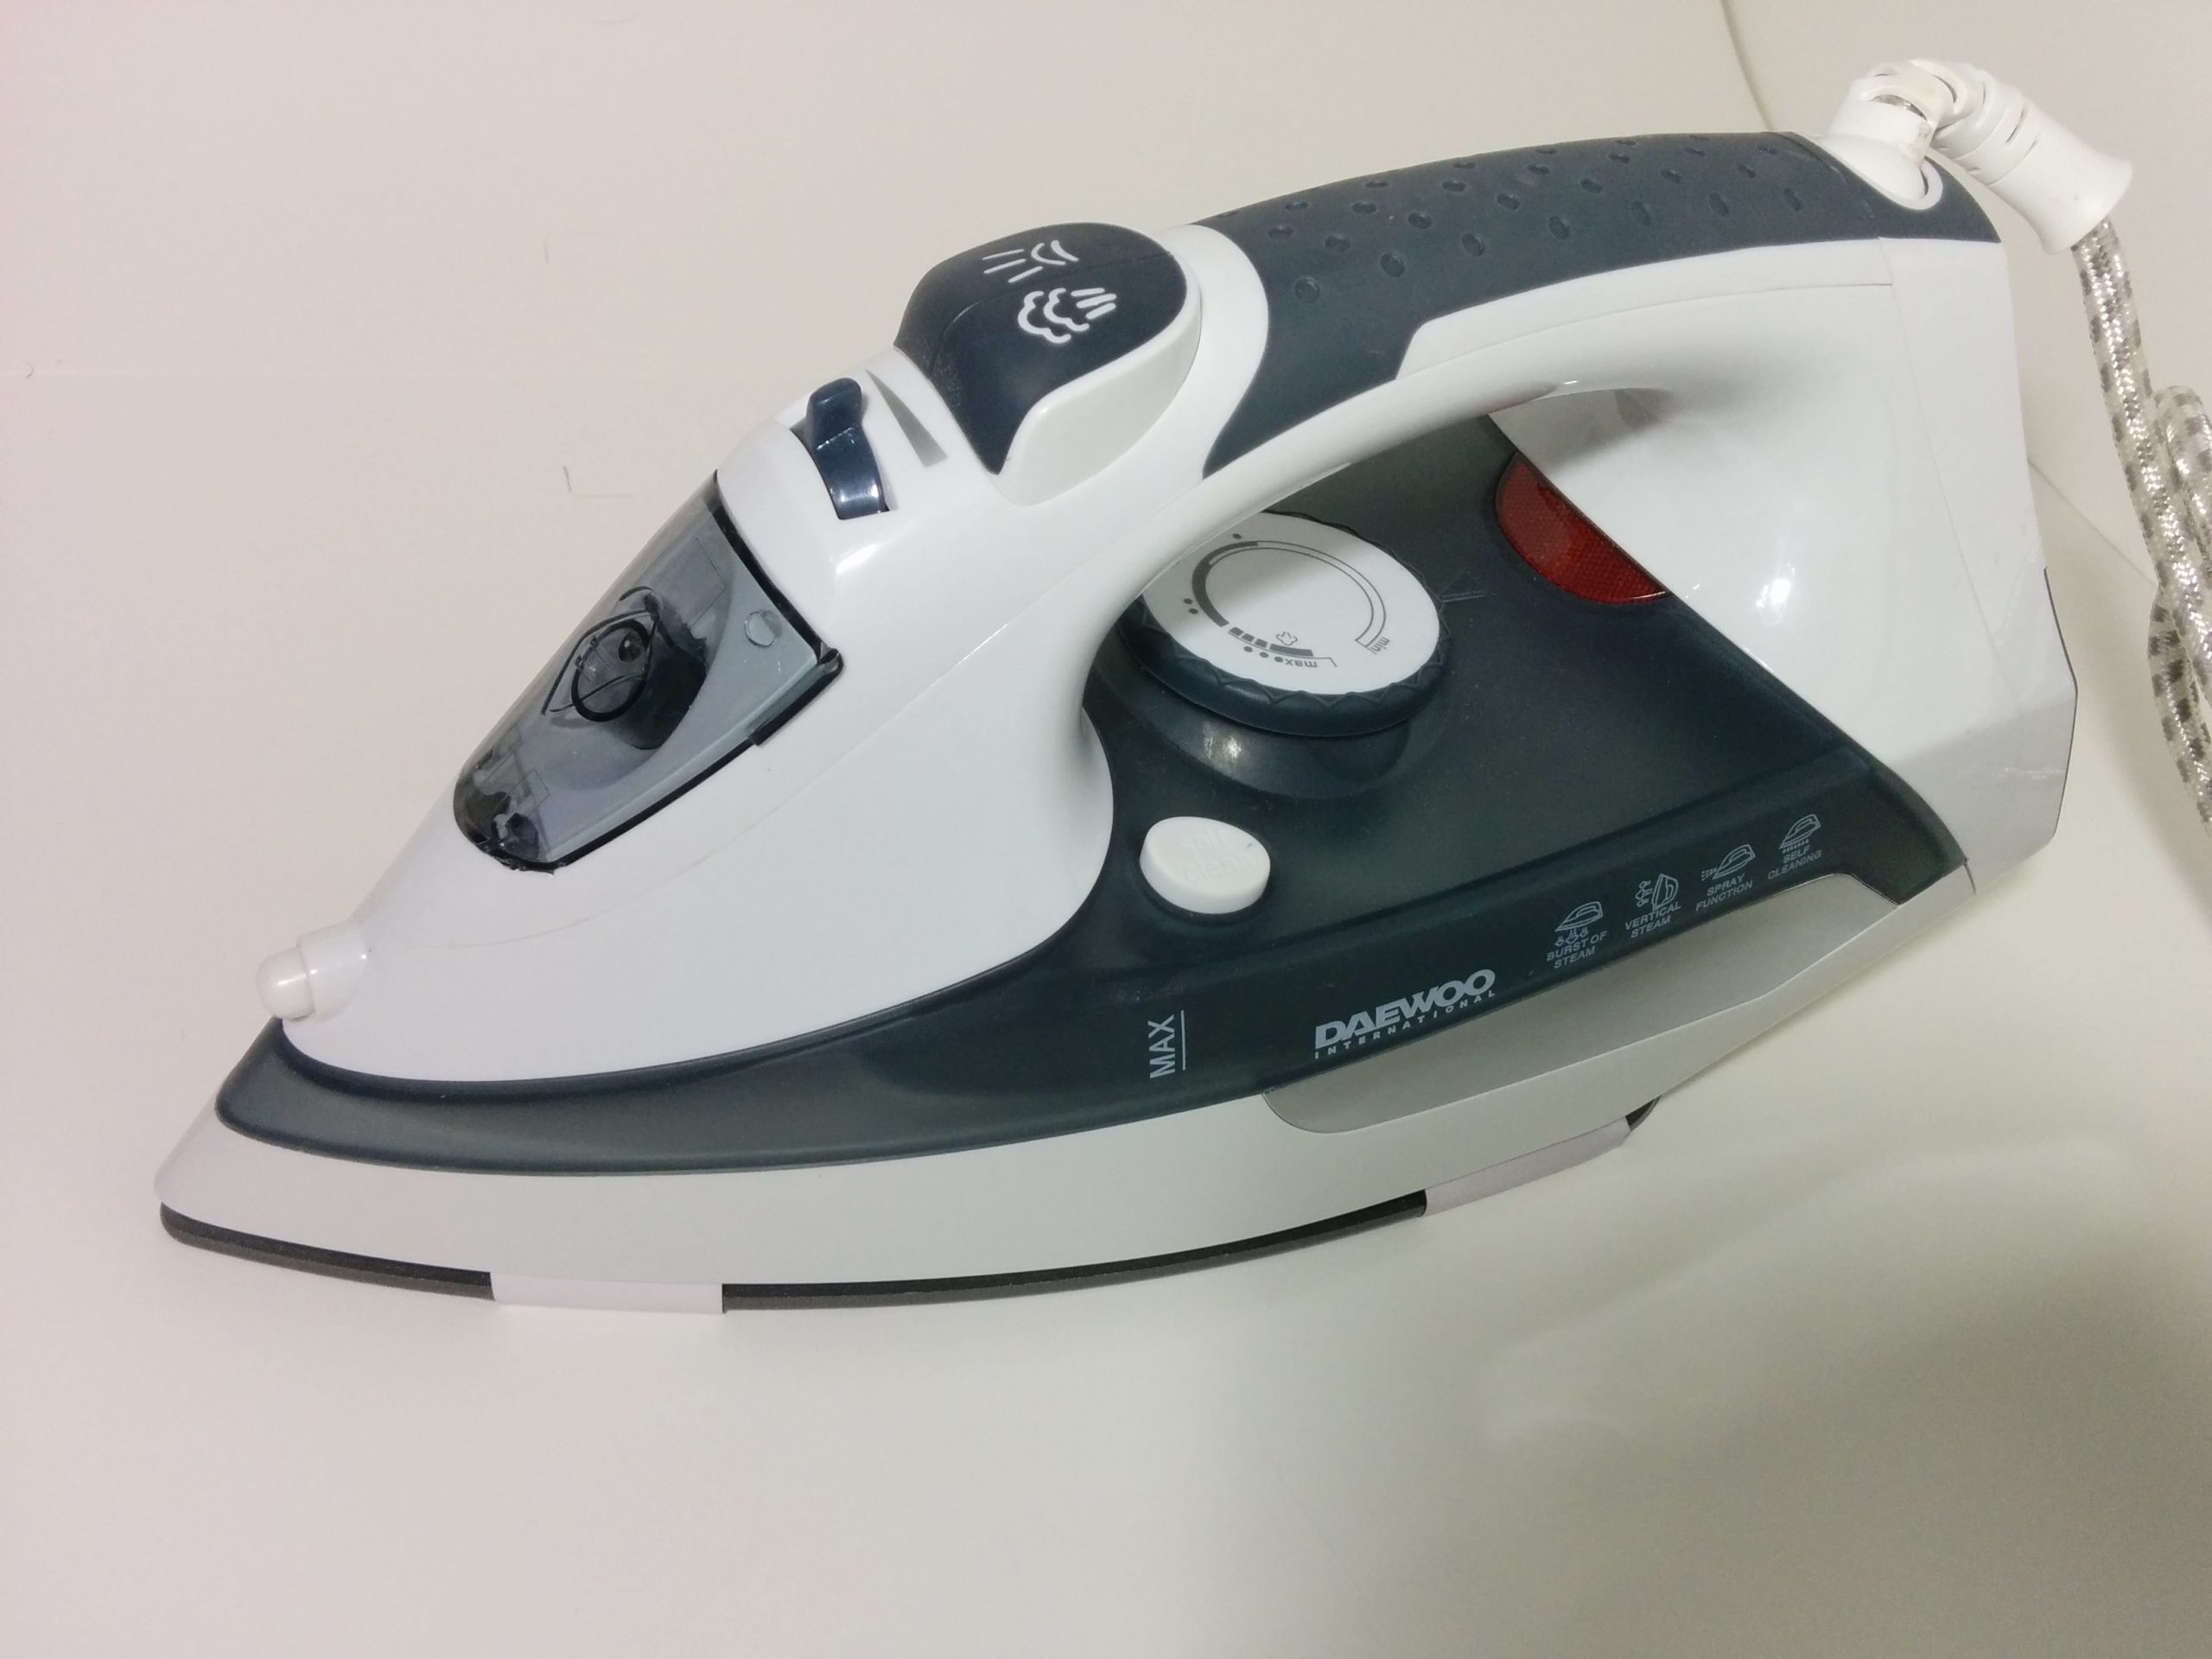 Details about   Daewoo DI9208 220 Volt Steam Iron Auto Shutoff Self Cleaning For 220V 240V 2200W 